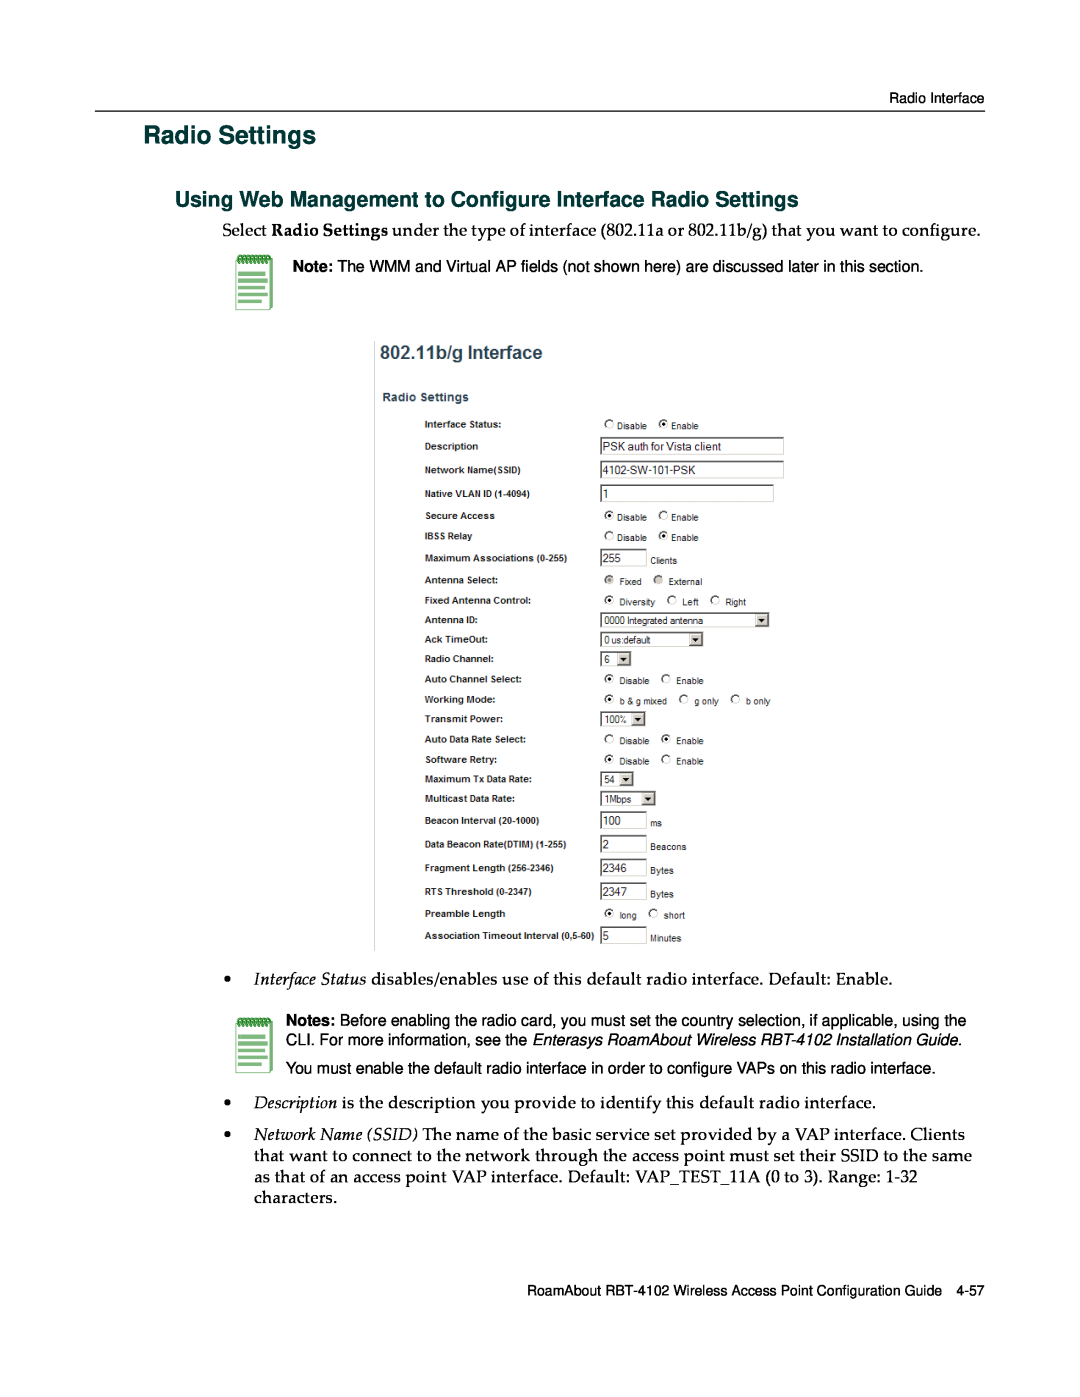 Enterasys Networks RBT-4102 manual Using Web Management to Configure Interface Radio Settings 